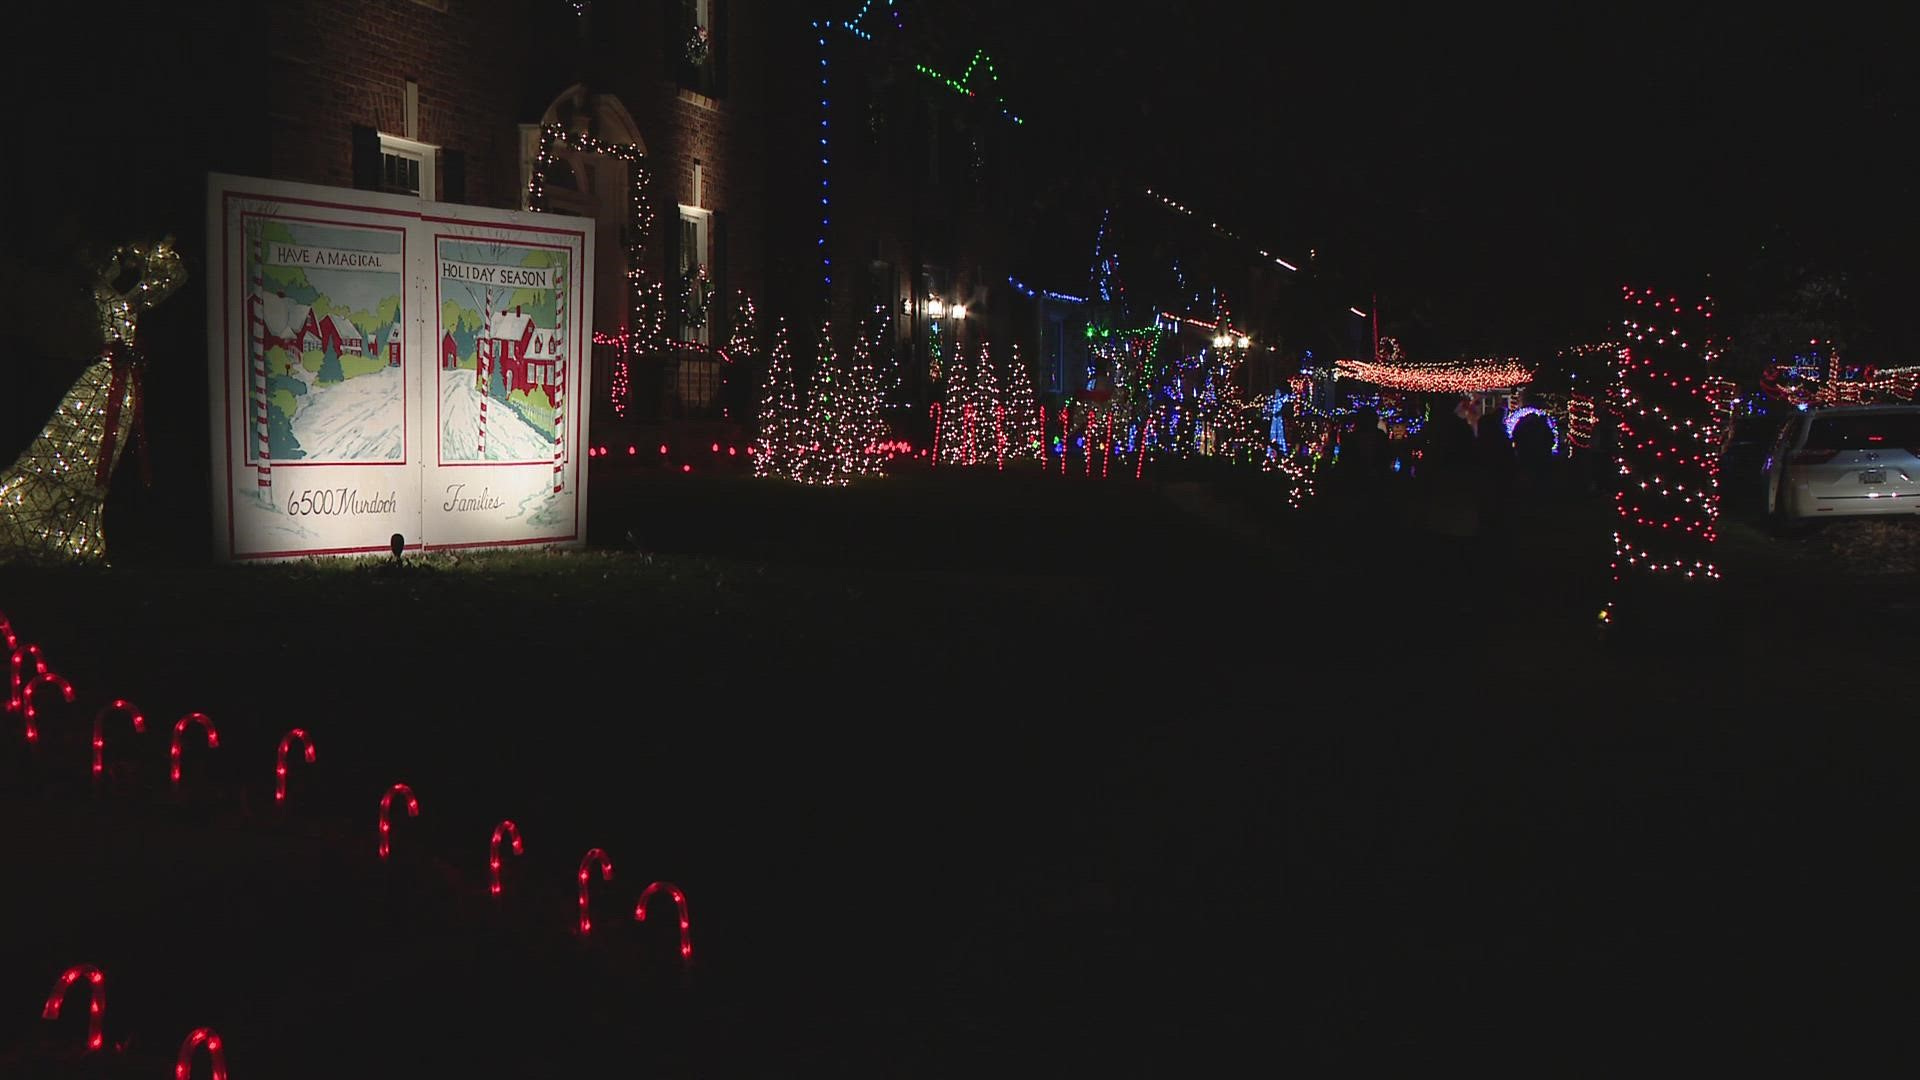 The south city neighborhood is a tradition for many St. Louisans. Here is a look at some of the holiday lights in 2021.